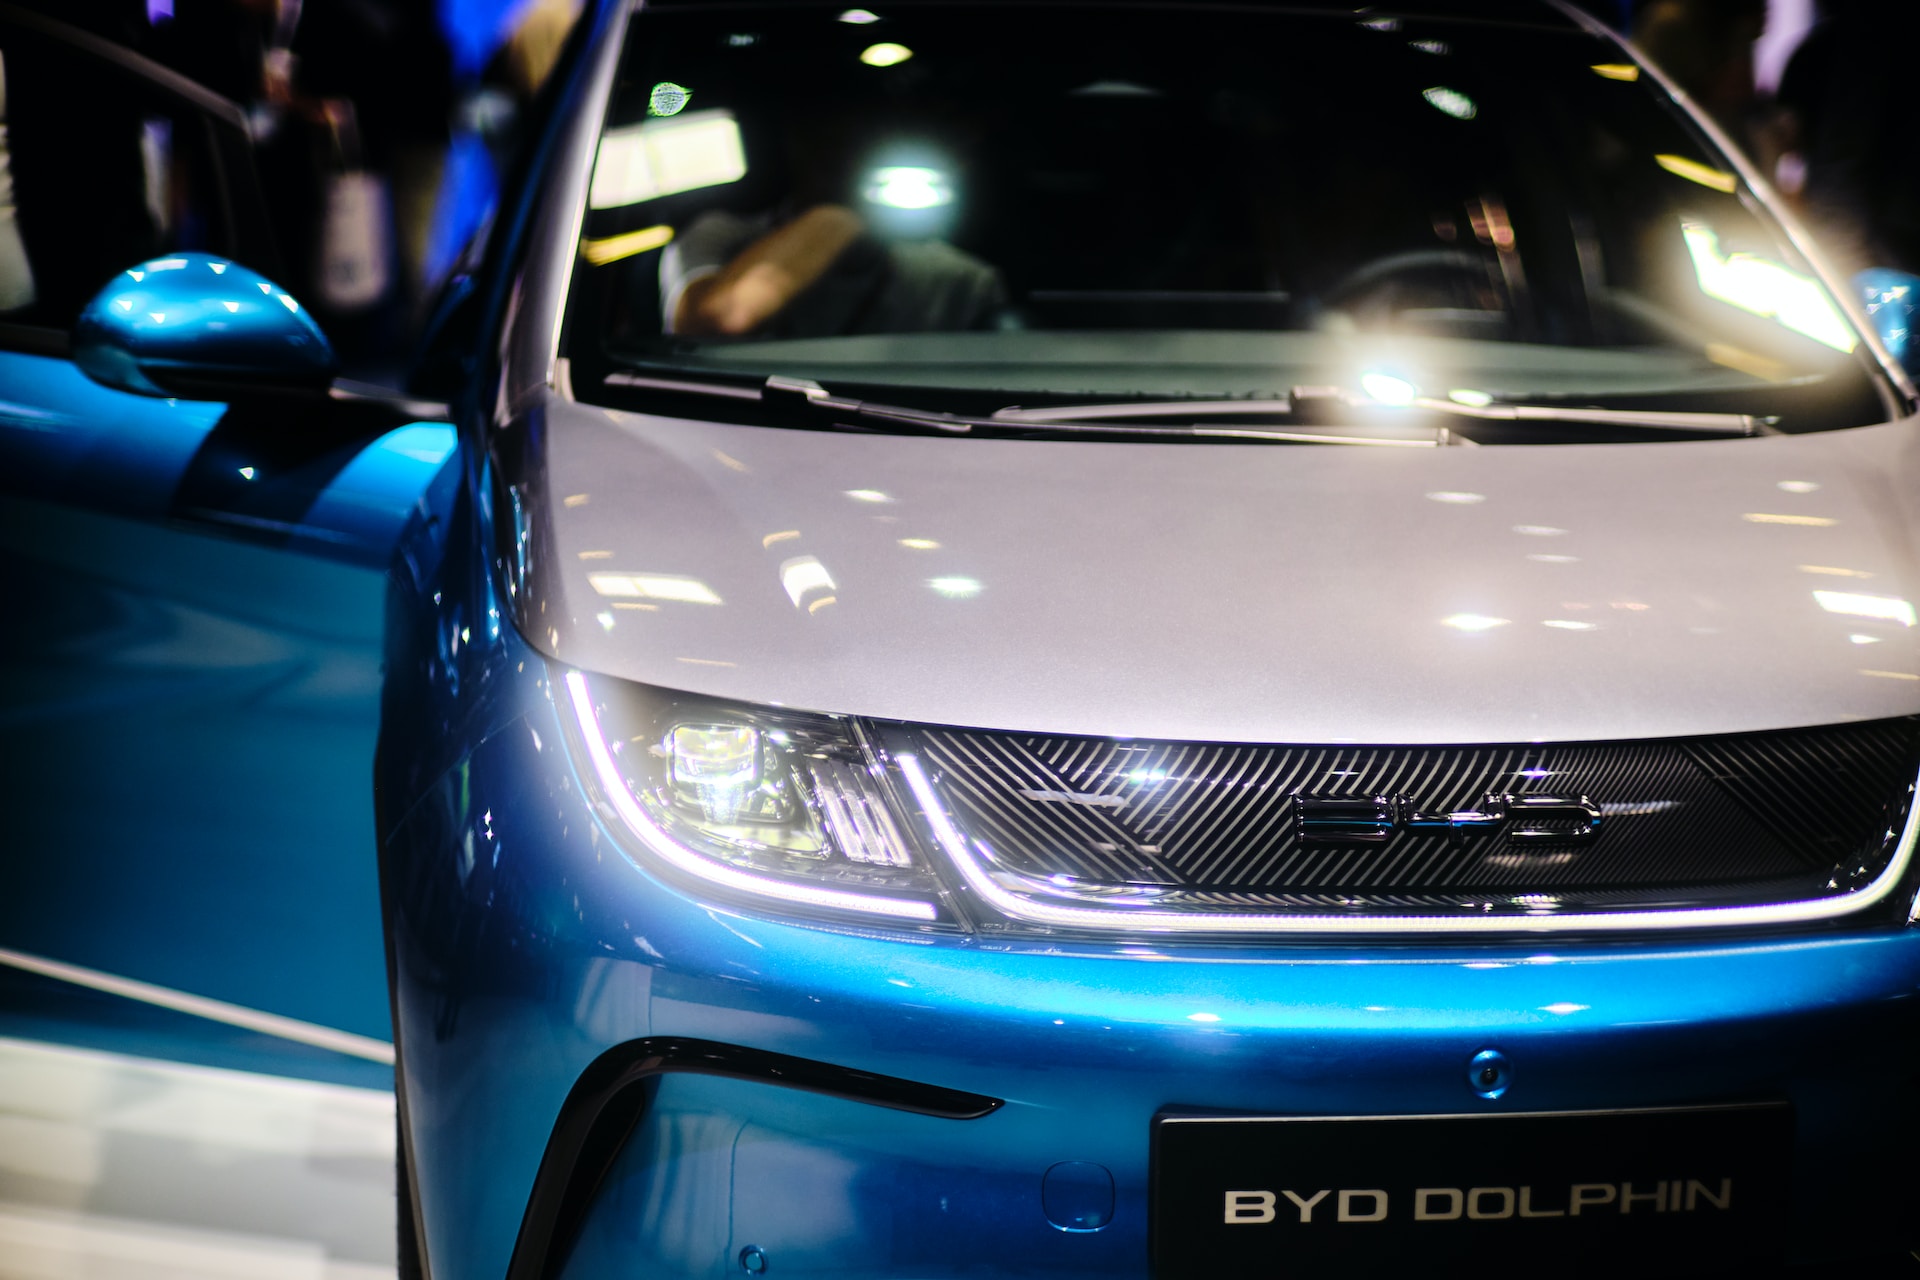 Chinese EVs Take the Global Lead in Exports, BYD Passes Tesla to Become World’s Top Seller